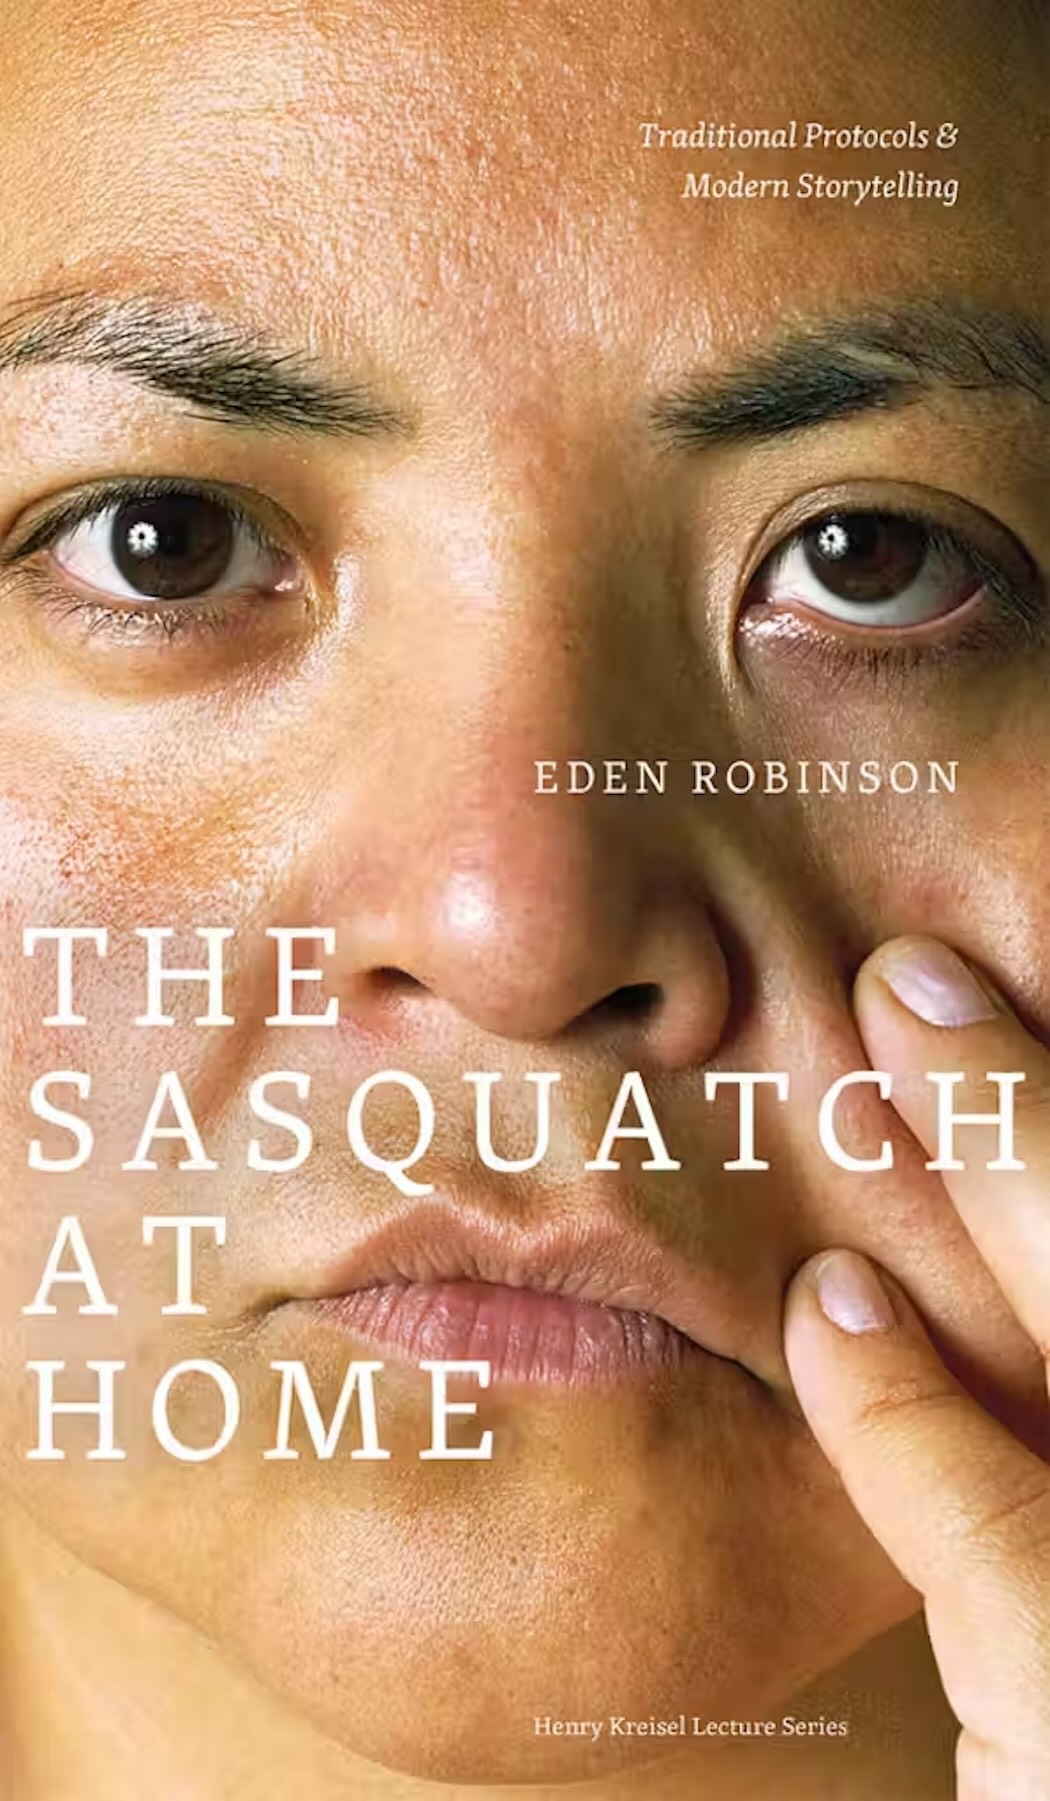 Cover Image of Eden Robinson's Kreisel Publication Titled The Sasquatch at Home